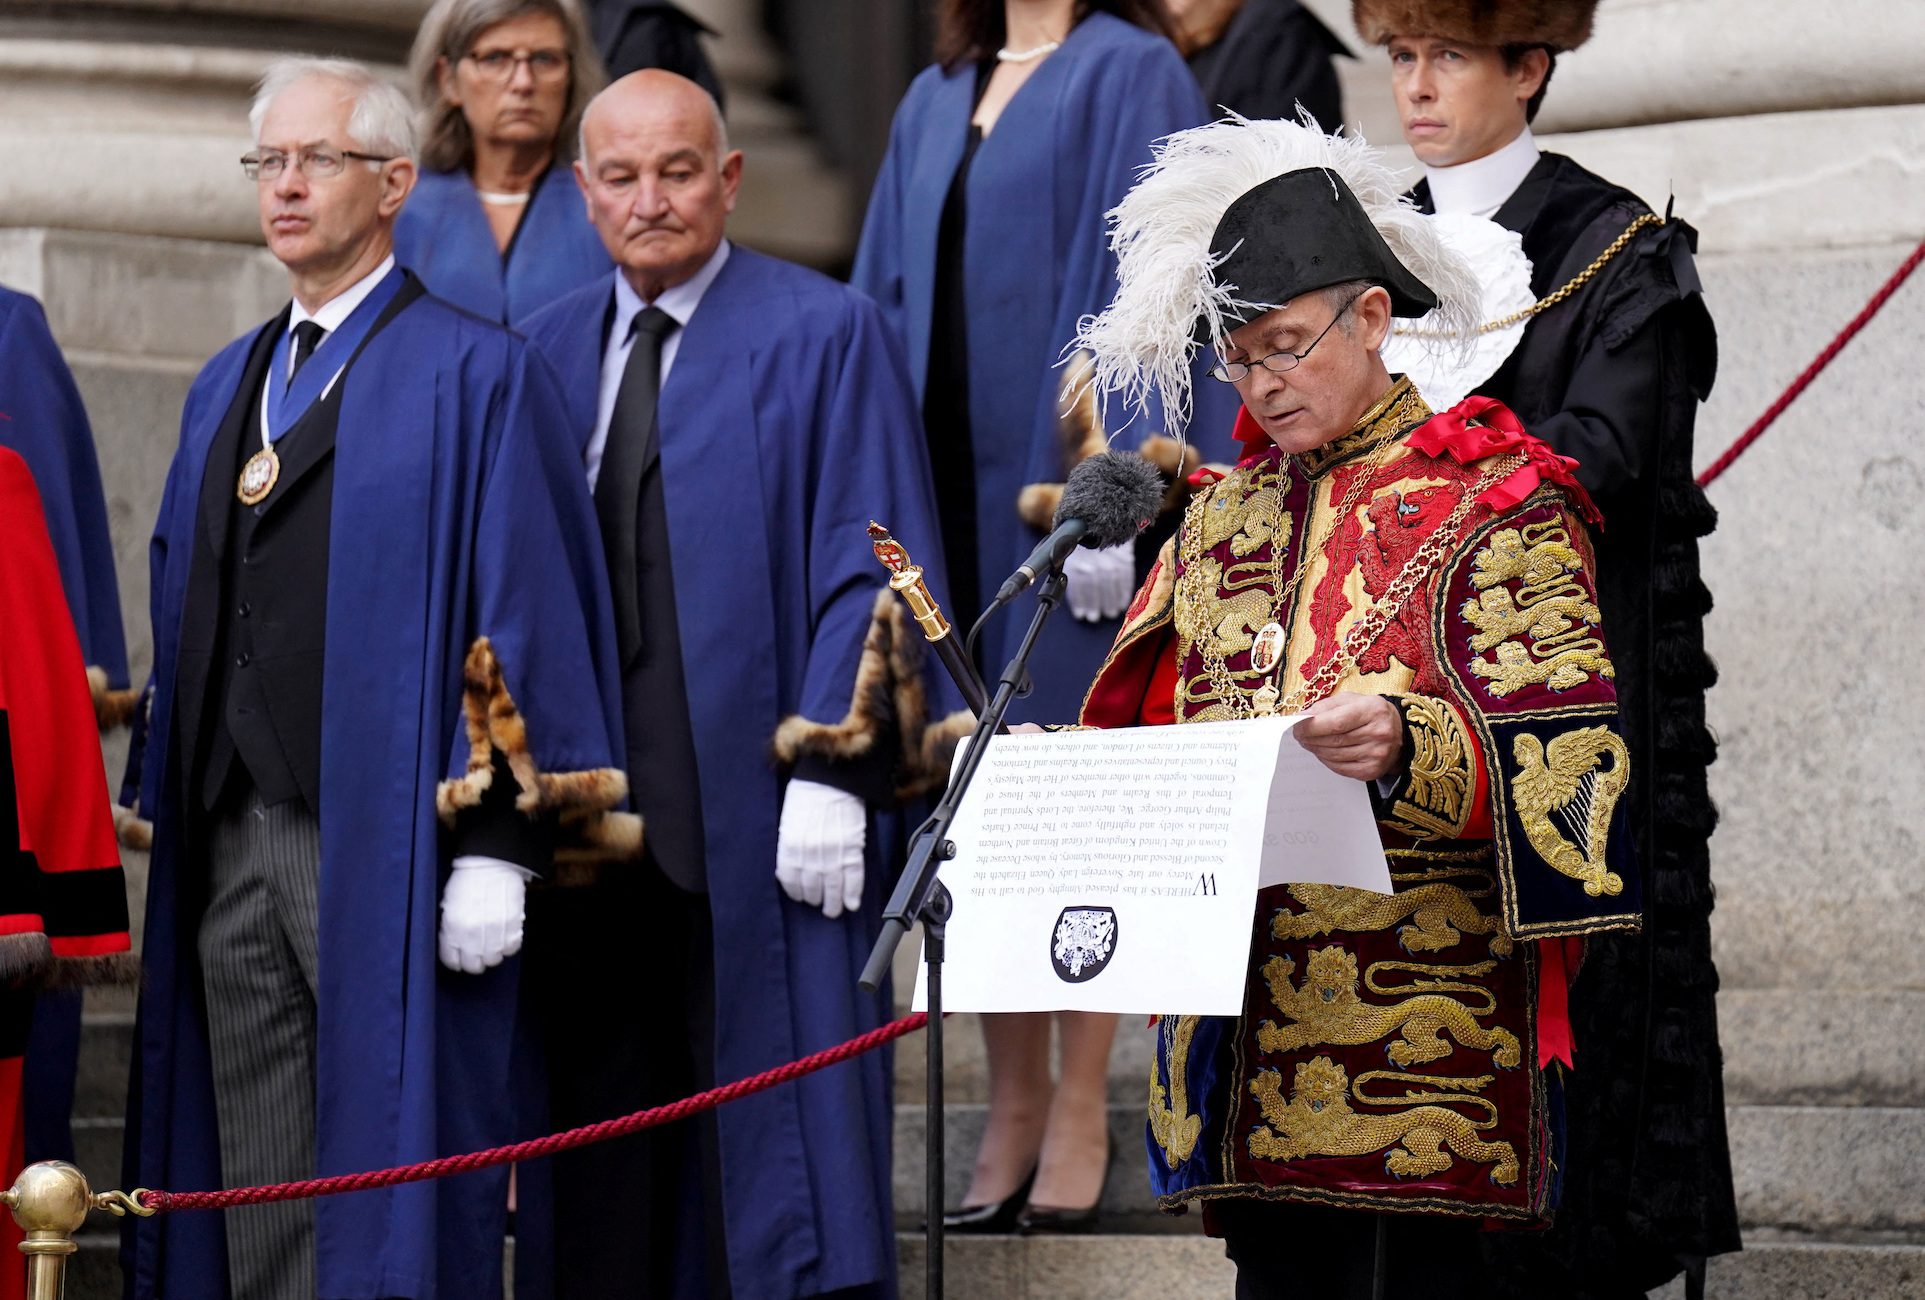 IN PHOTOS: King Charles proclaimed Britain’s new monarch